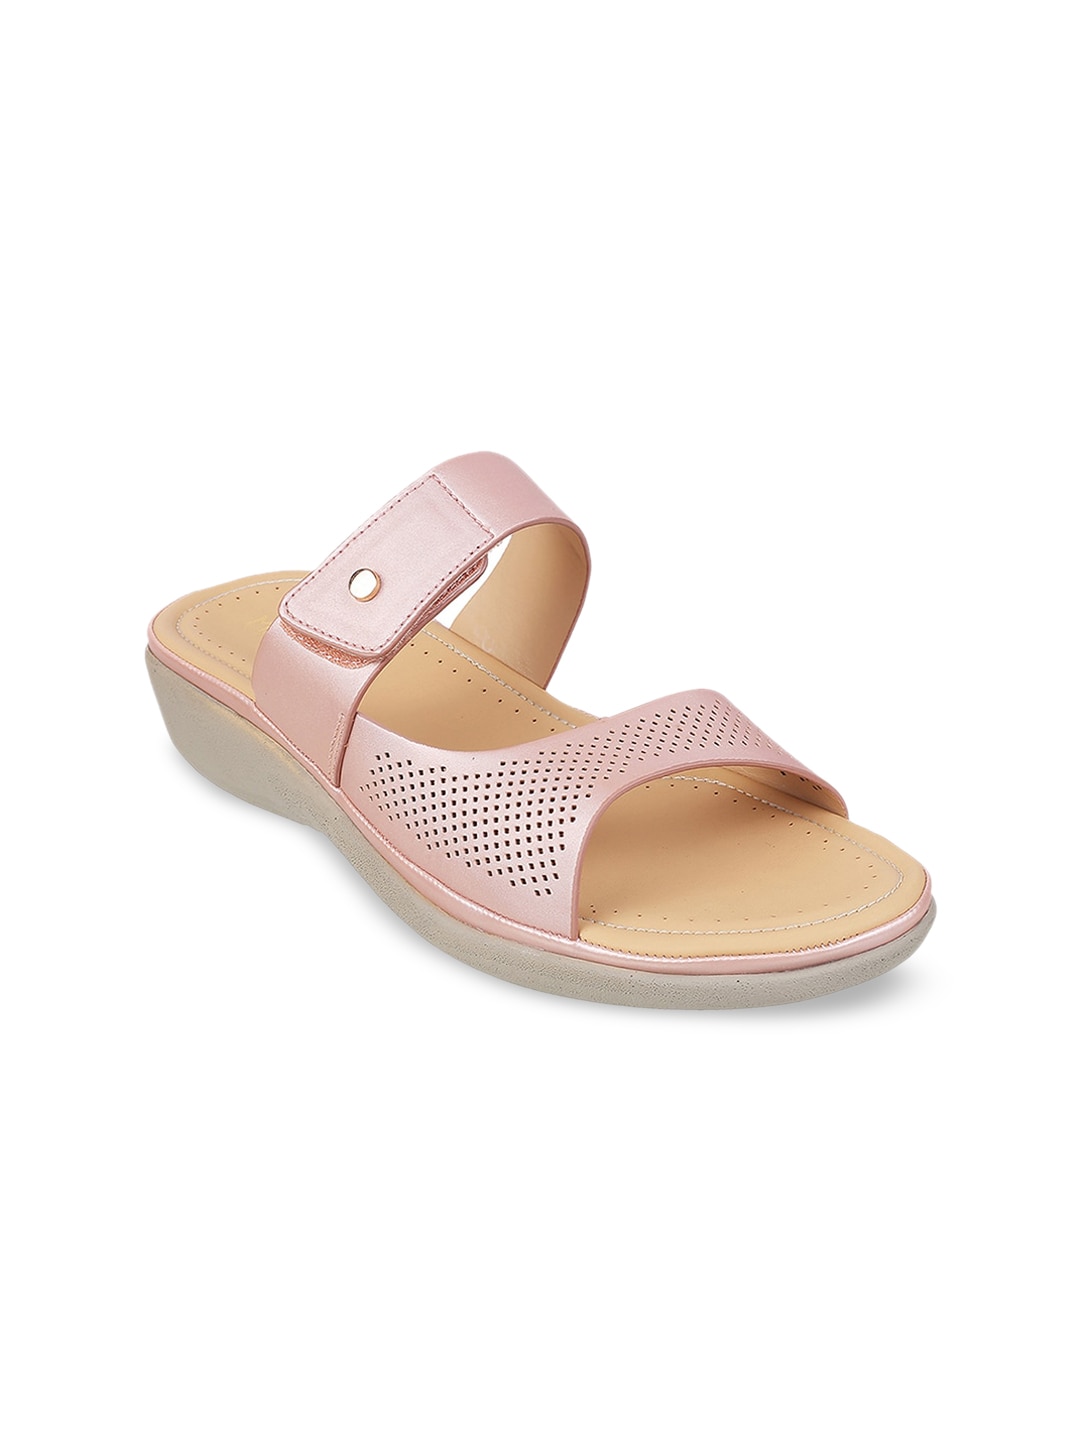 Metro Peach-Coloured Comfort Sandals with Laser Cuts Price in India